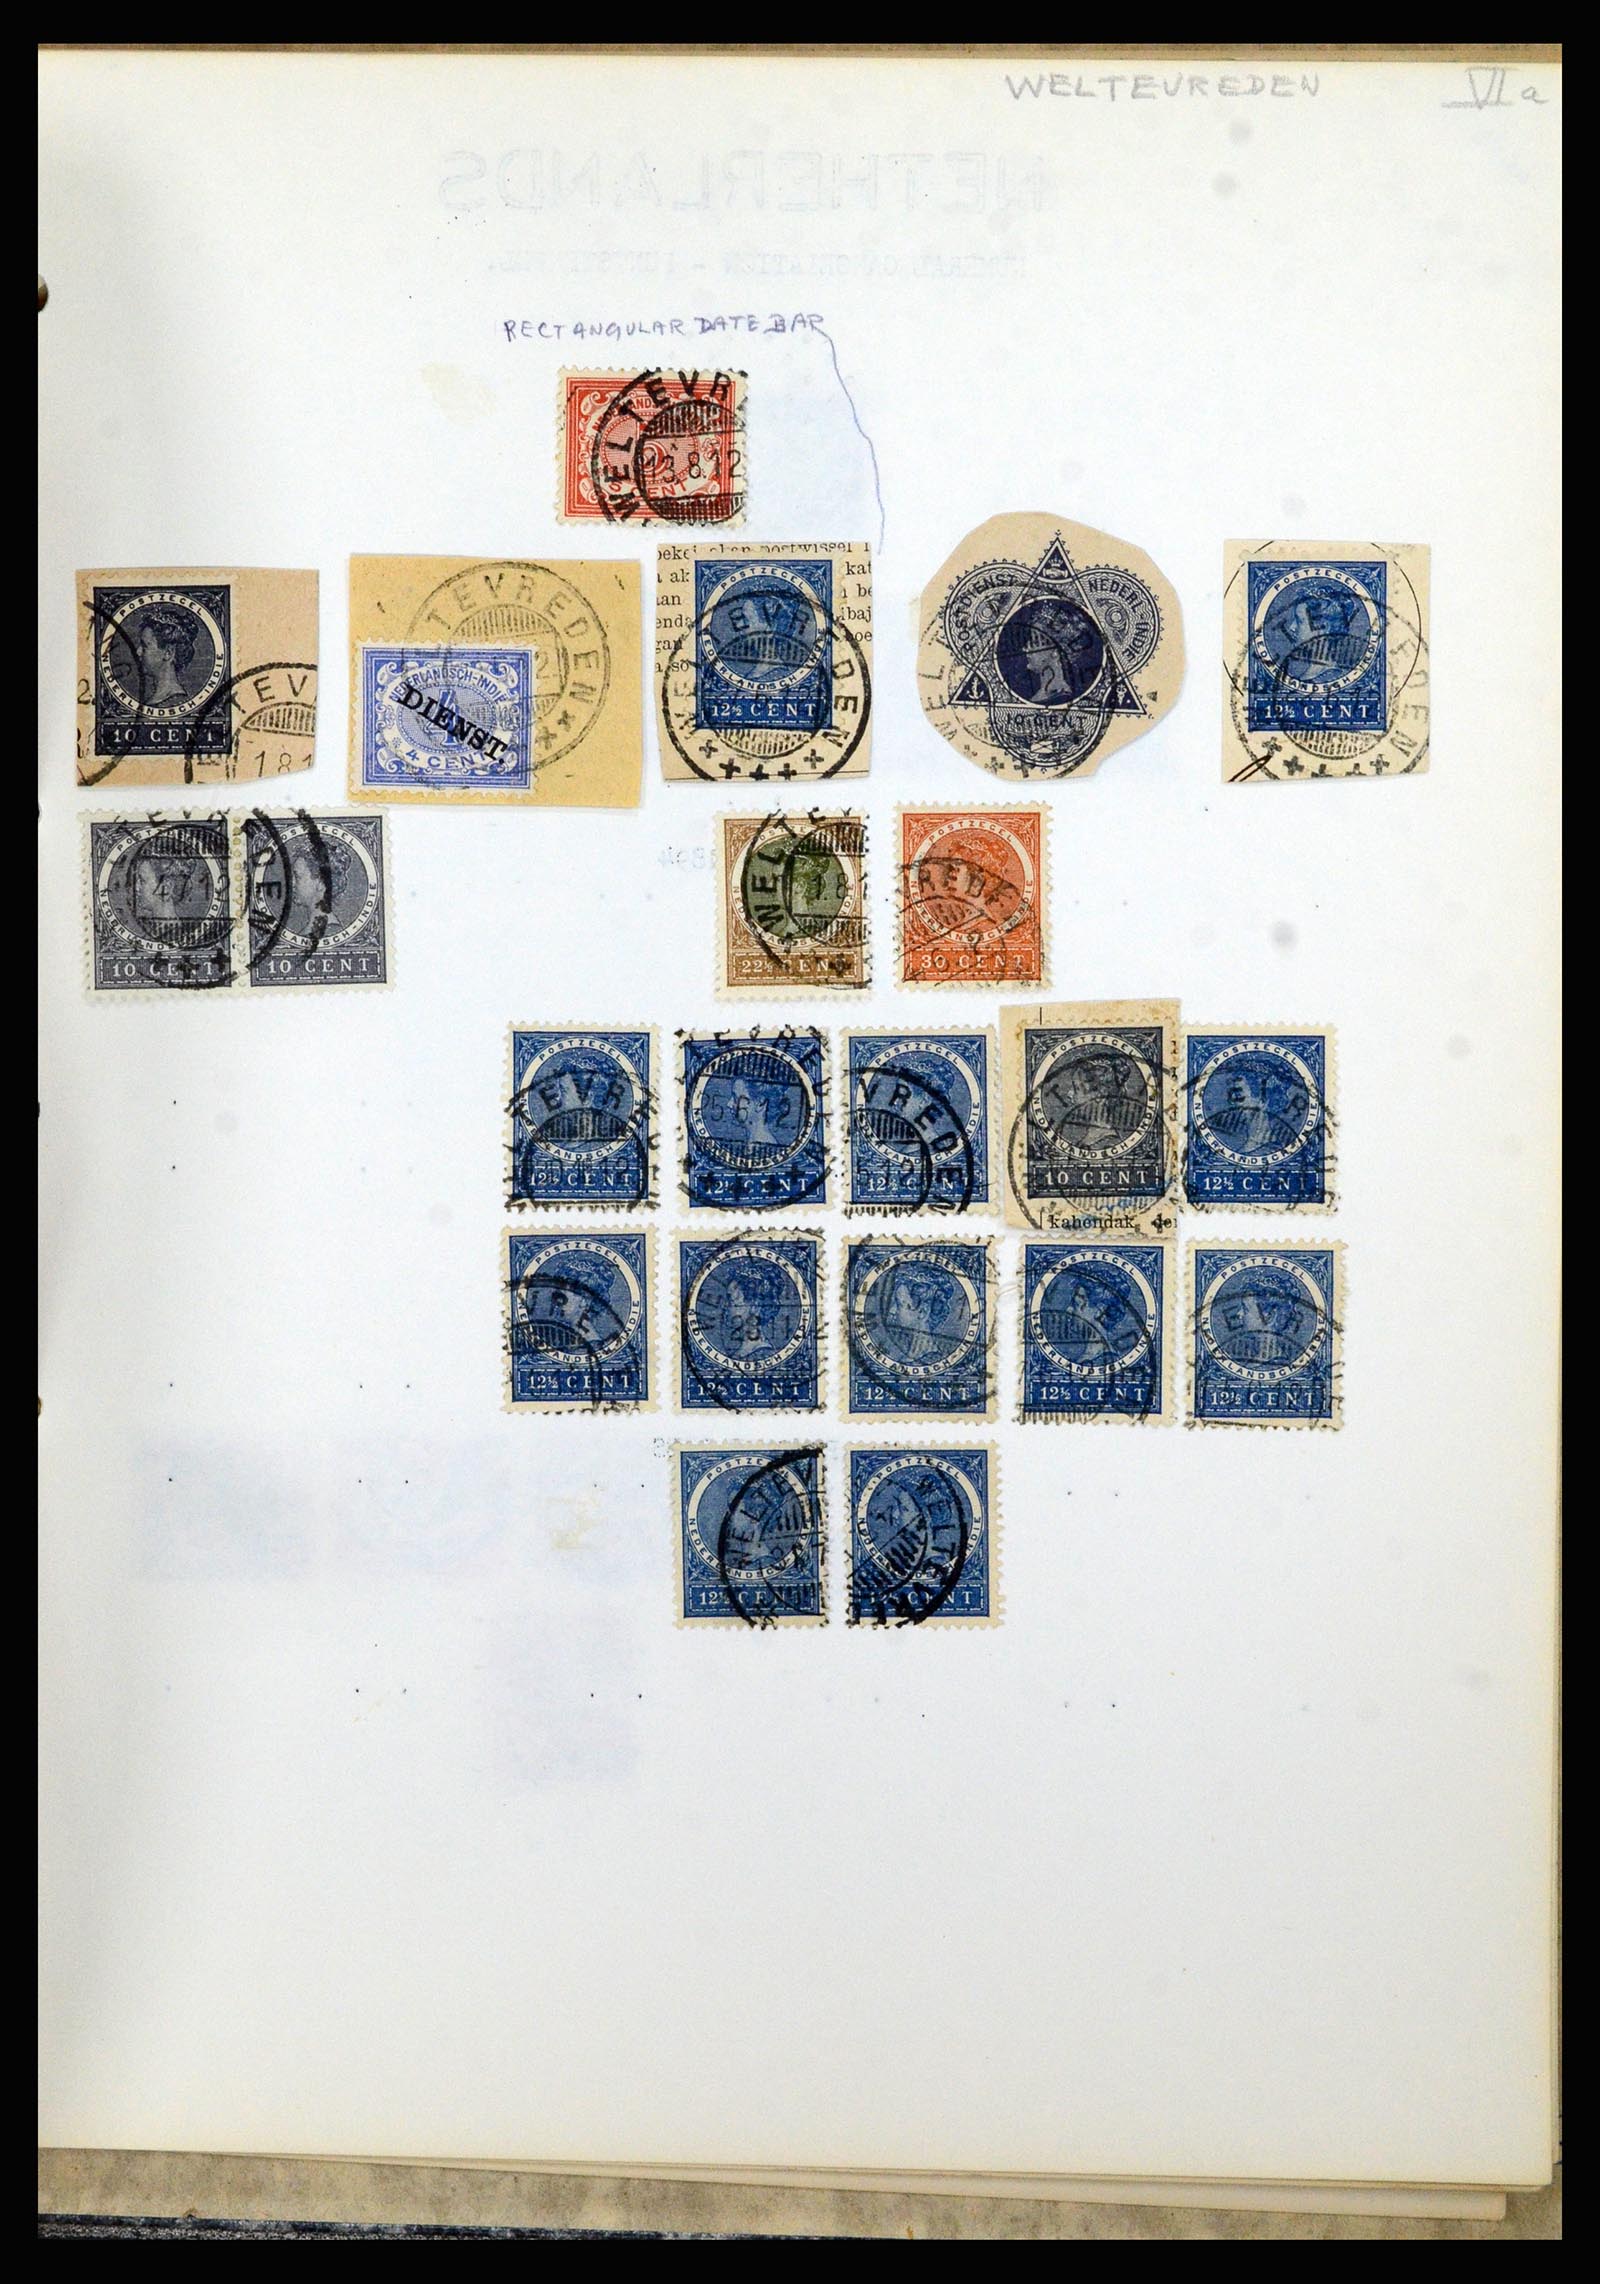 36841 186 - Stamp collection 36841 Dutch east Indies short bar cancels.